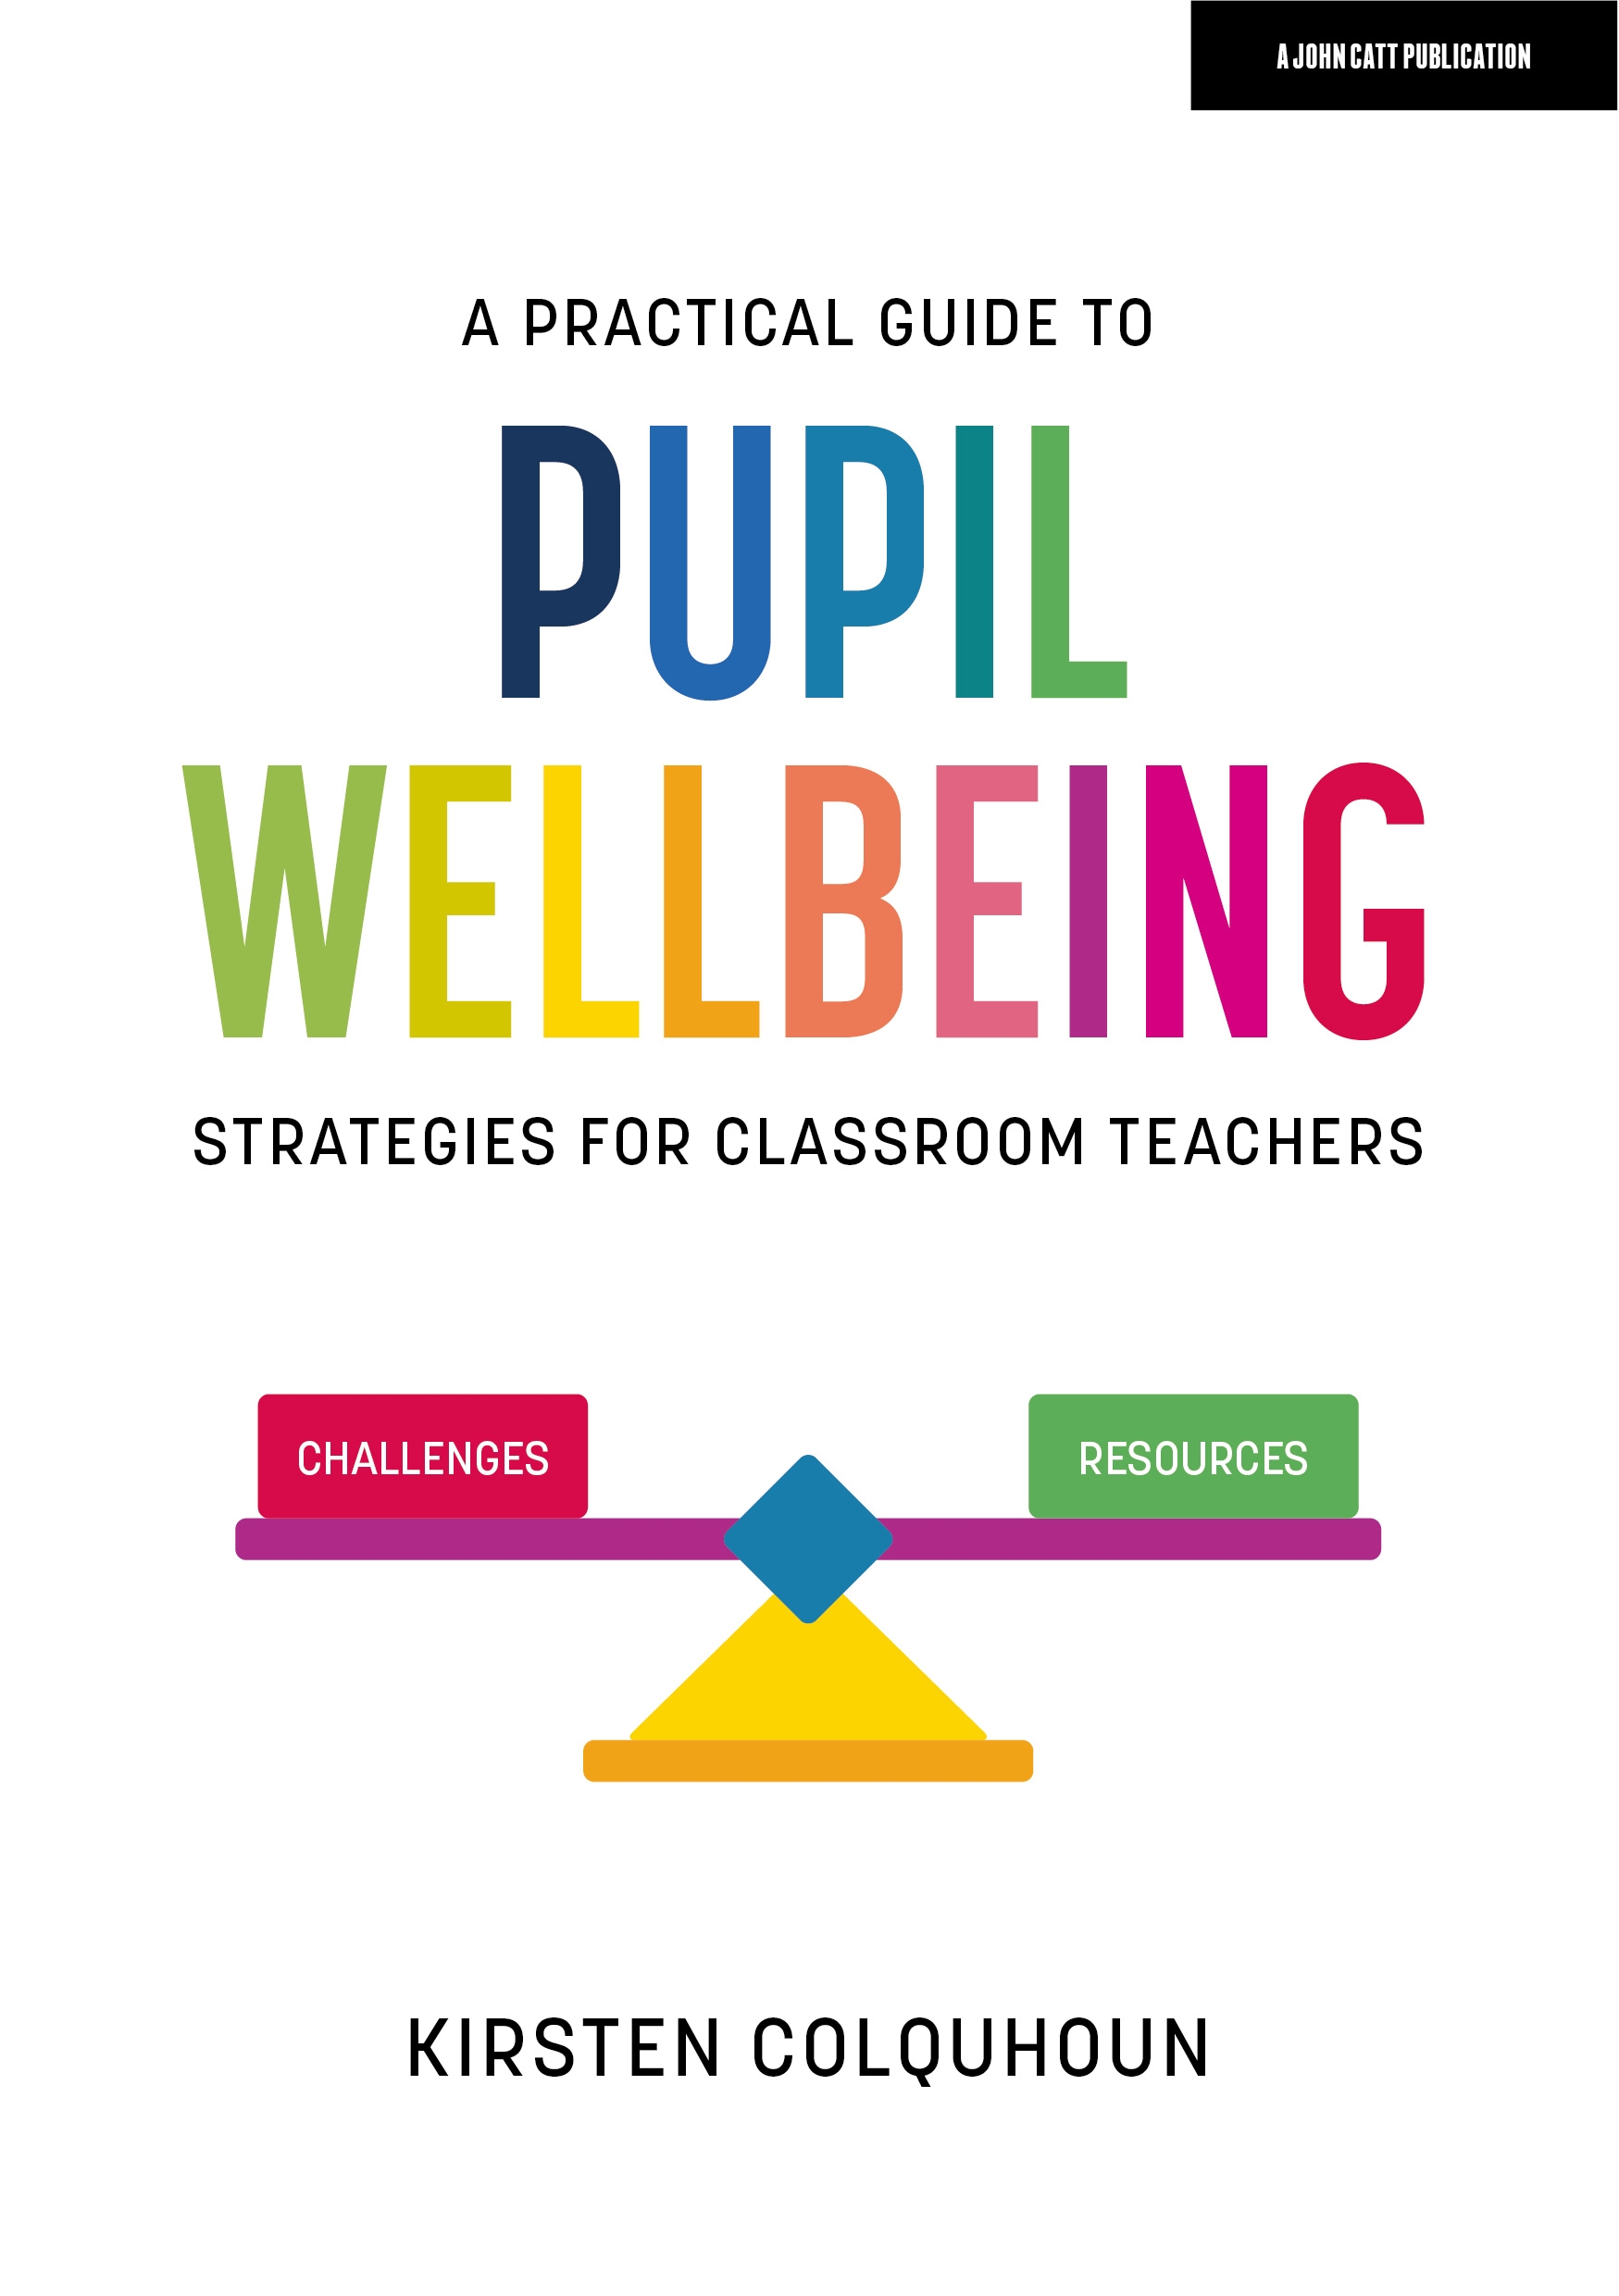 Featured image for “A Practical Guide to Pupil Wellbeing: Strategies for classroom teachers”